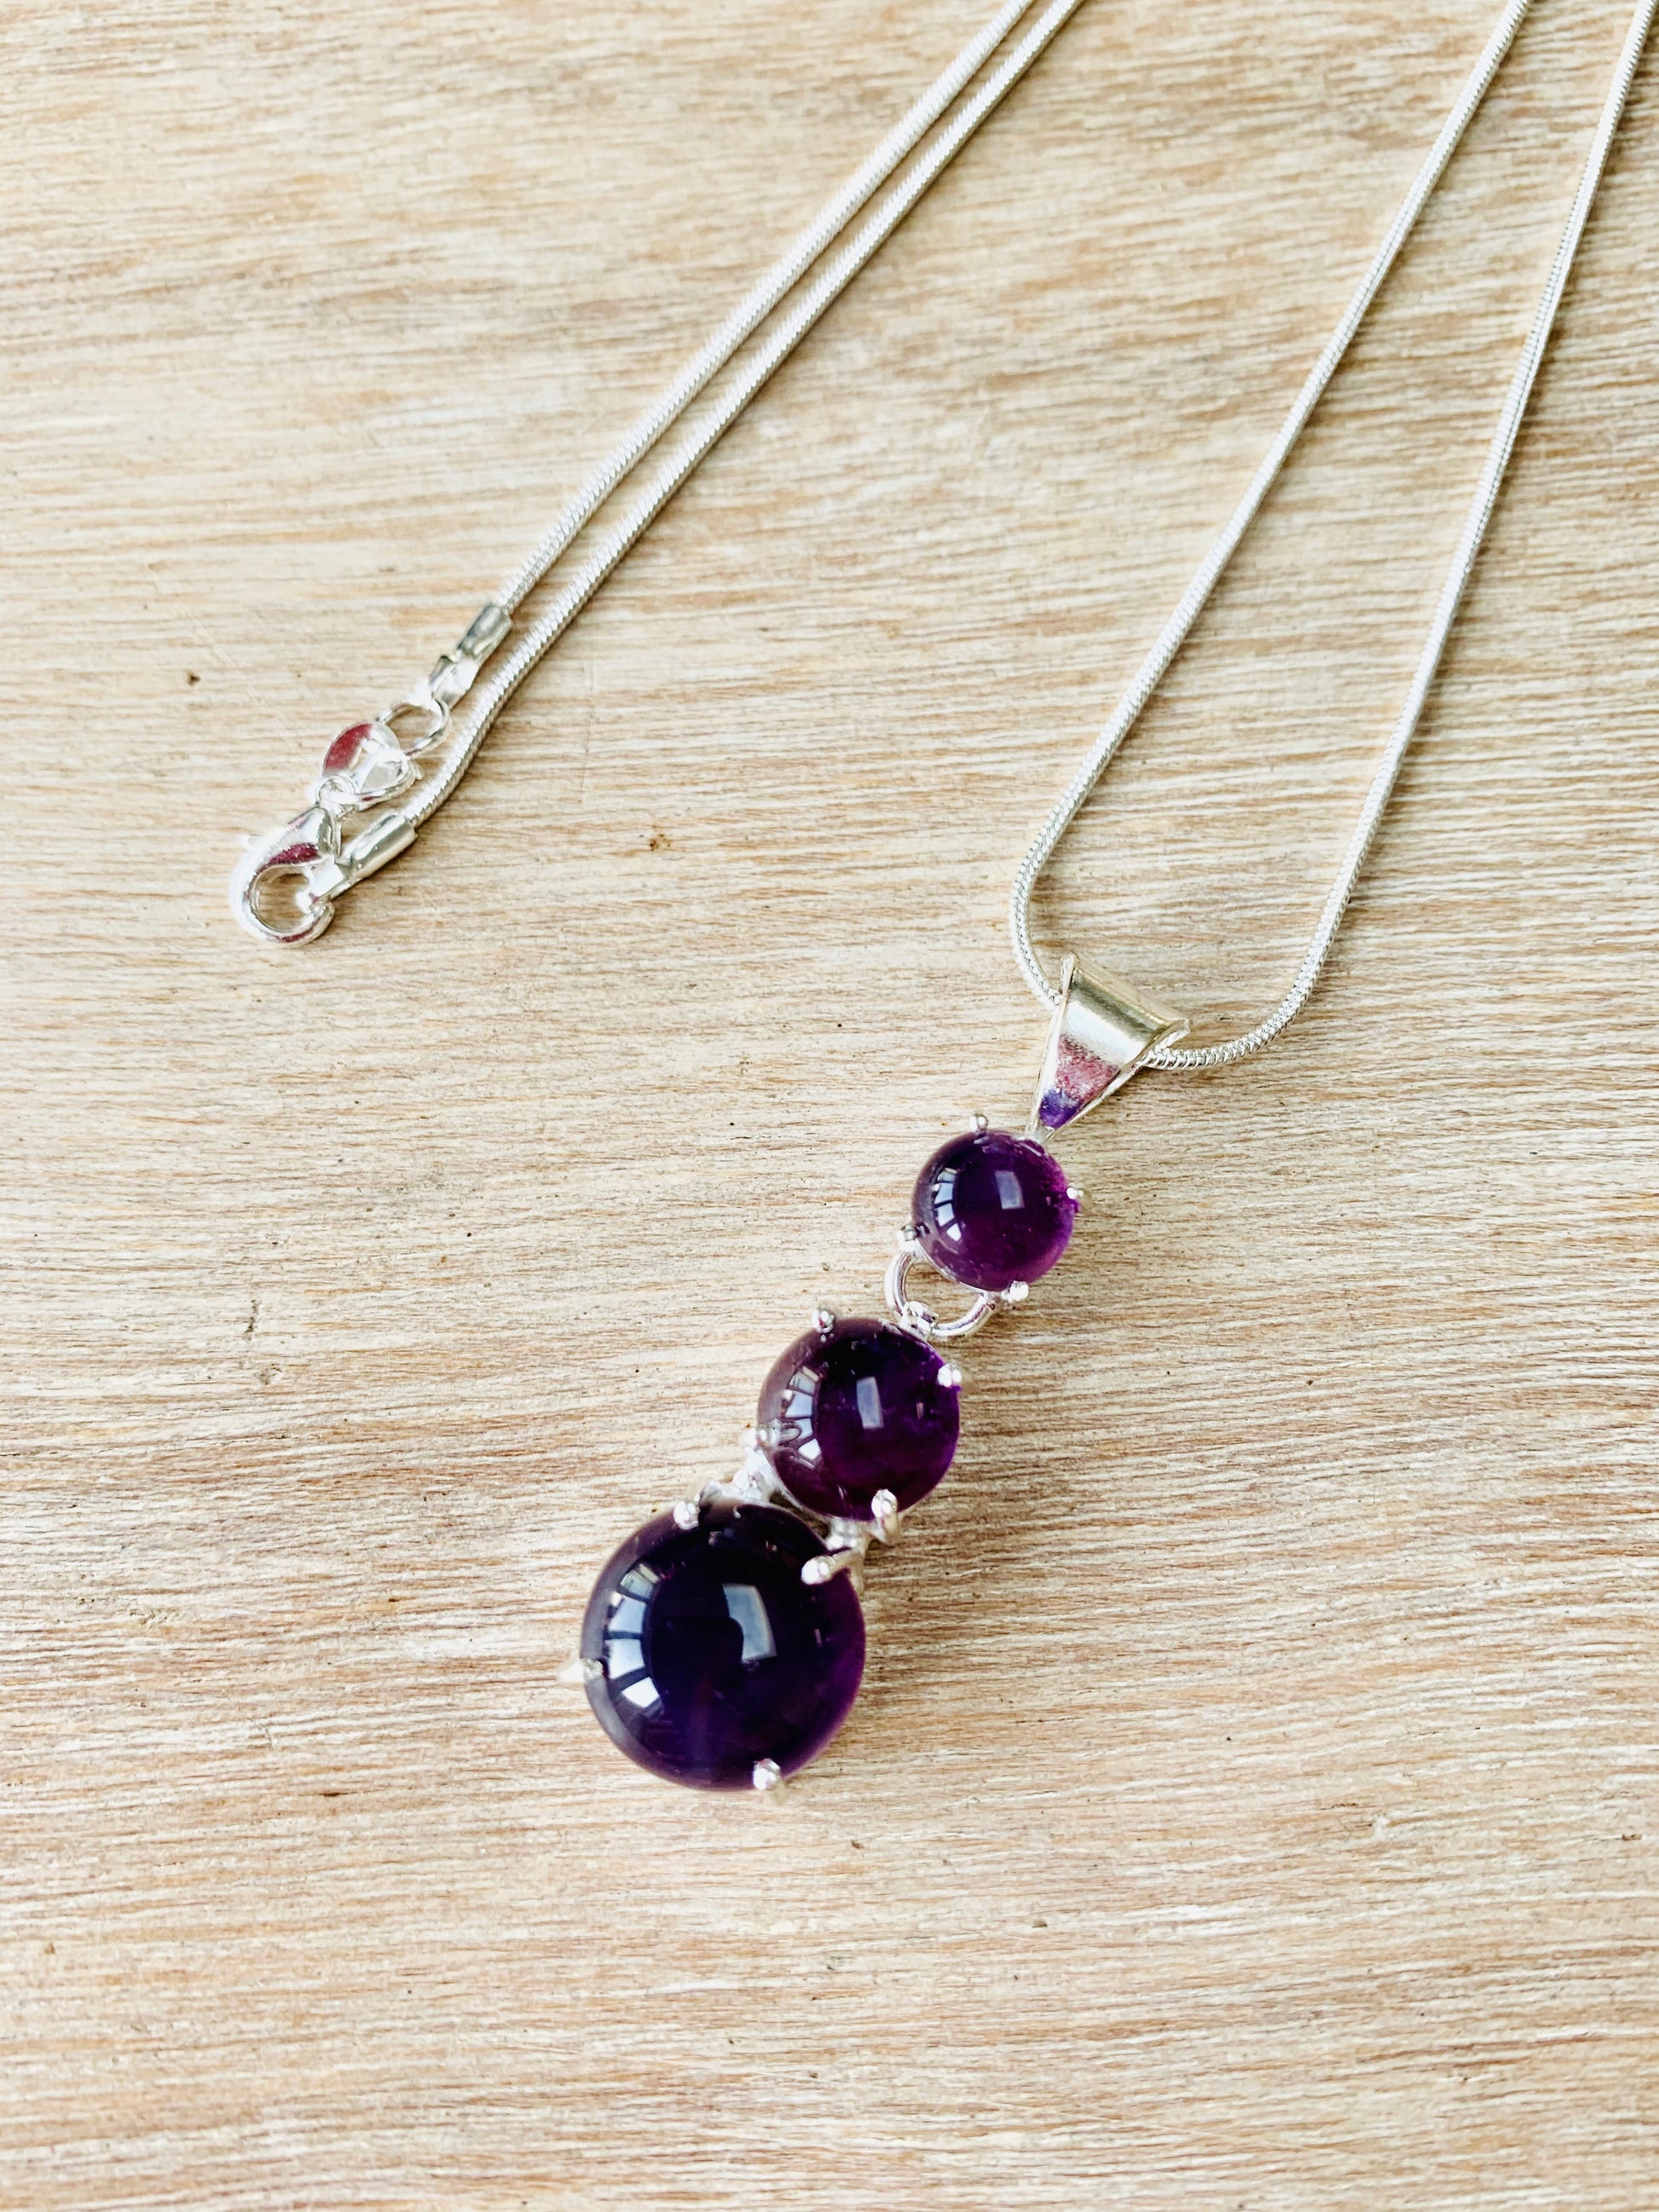 Amethyst 3 Stone Crystal Pendant & 925 Silver Plated Chain - Crystal boutique.co.uk